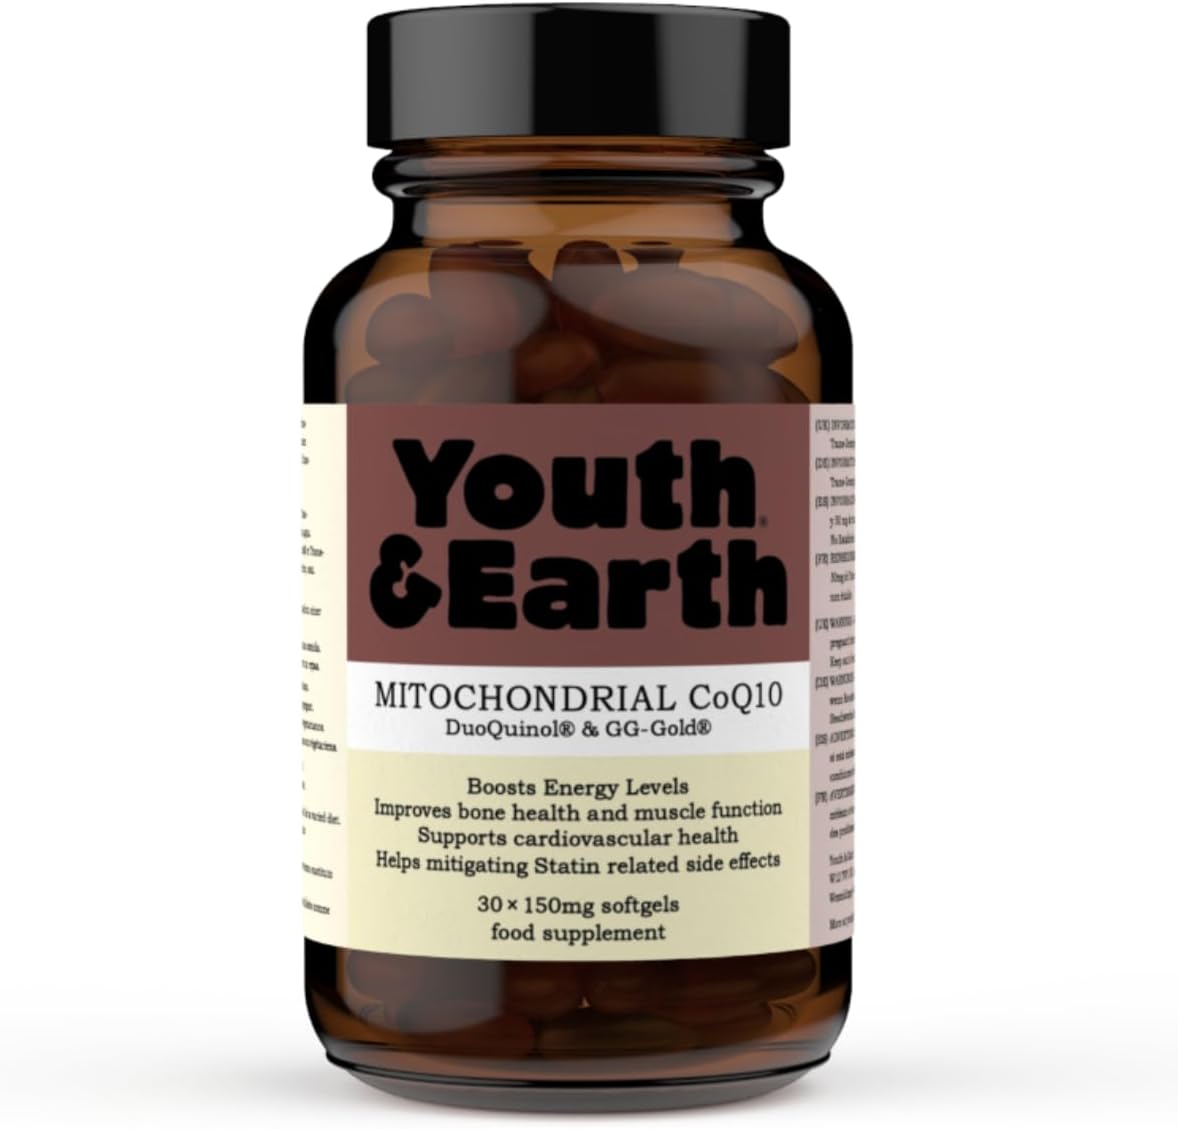 Youth & Earth Mitochondriaal CoQ10 ...